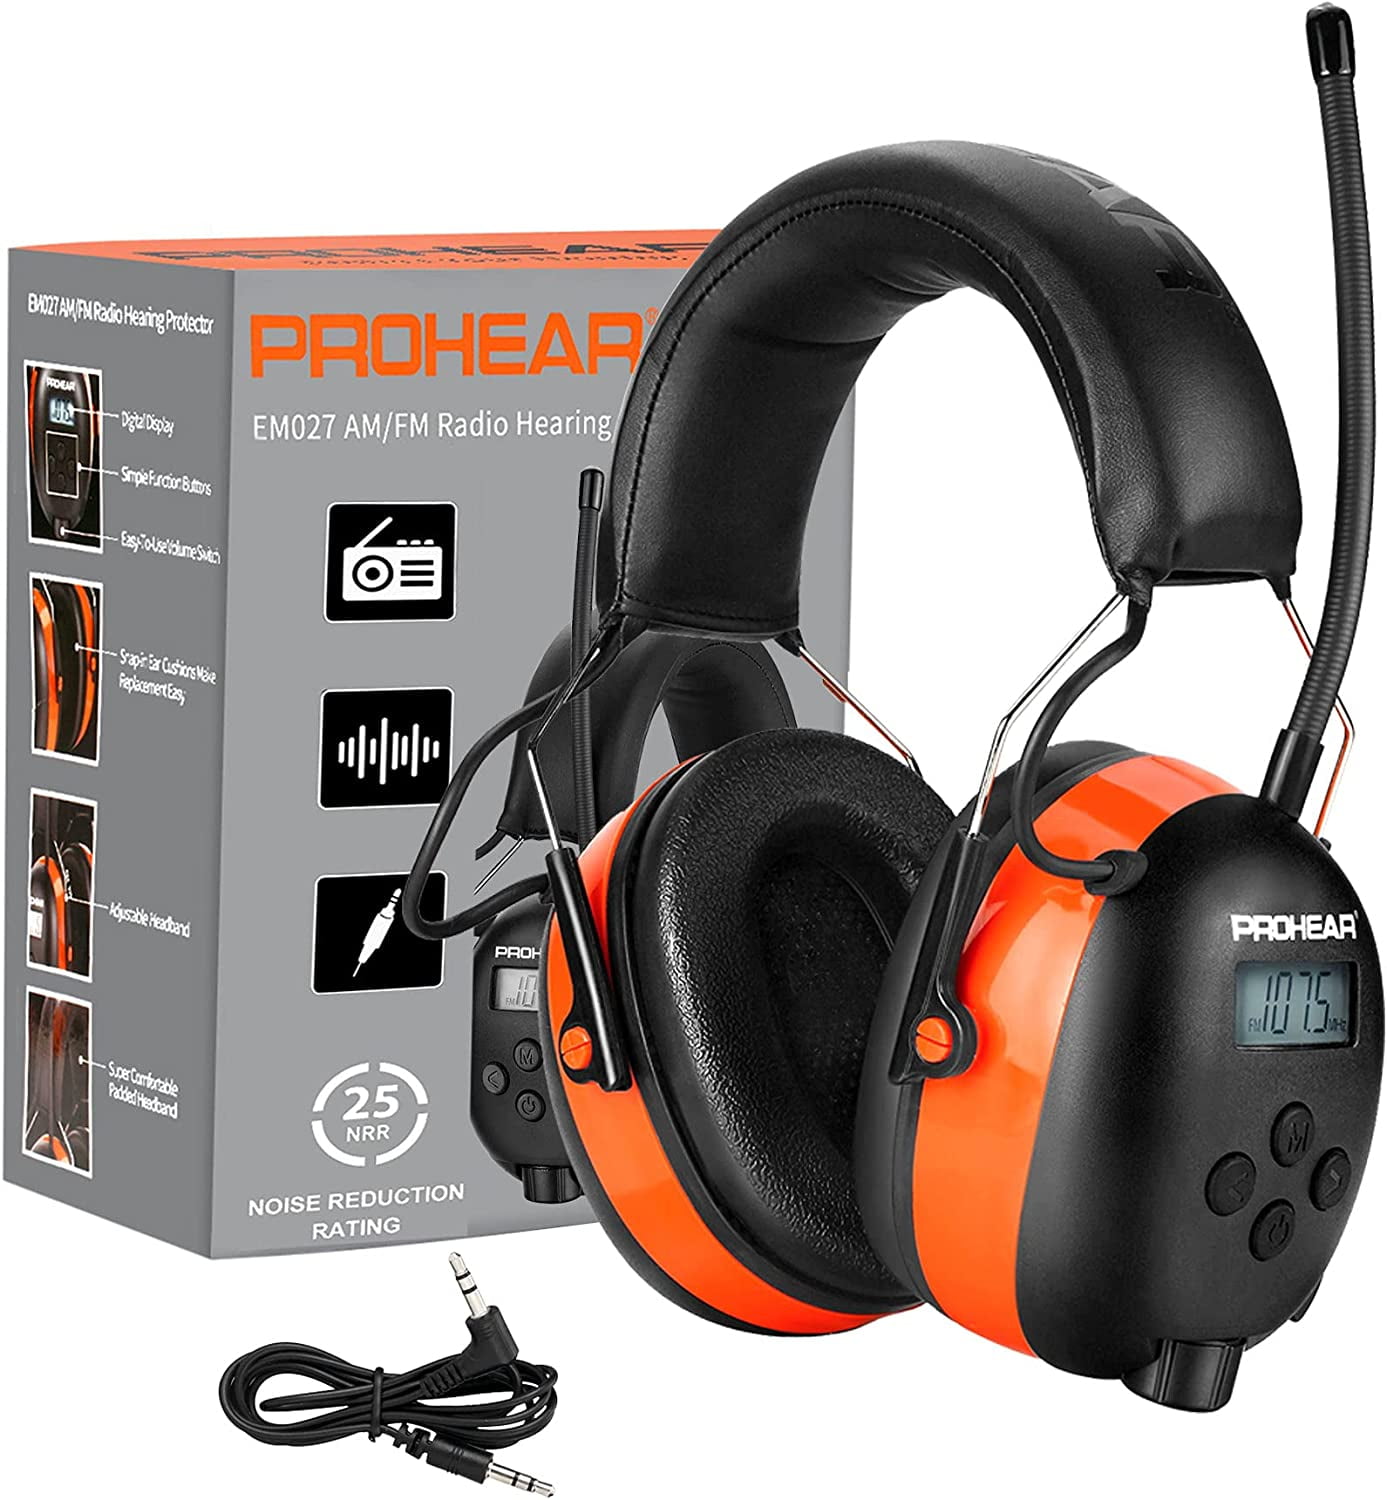 PROHEAR 027 AM FM Radio Headphones with LCD Screen, 25dB NRR, Durable and Safe  Earmuffs for Mowing, Woodworking, Construction Orange